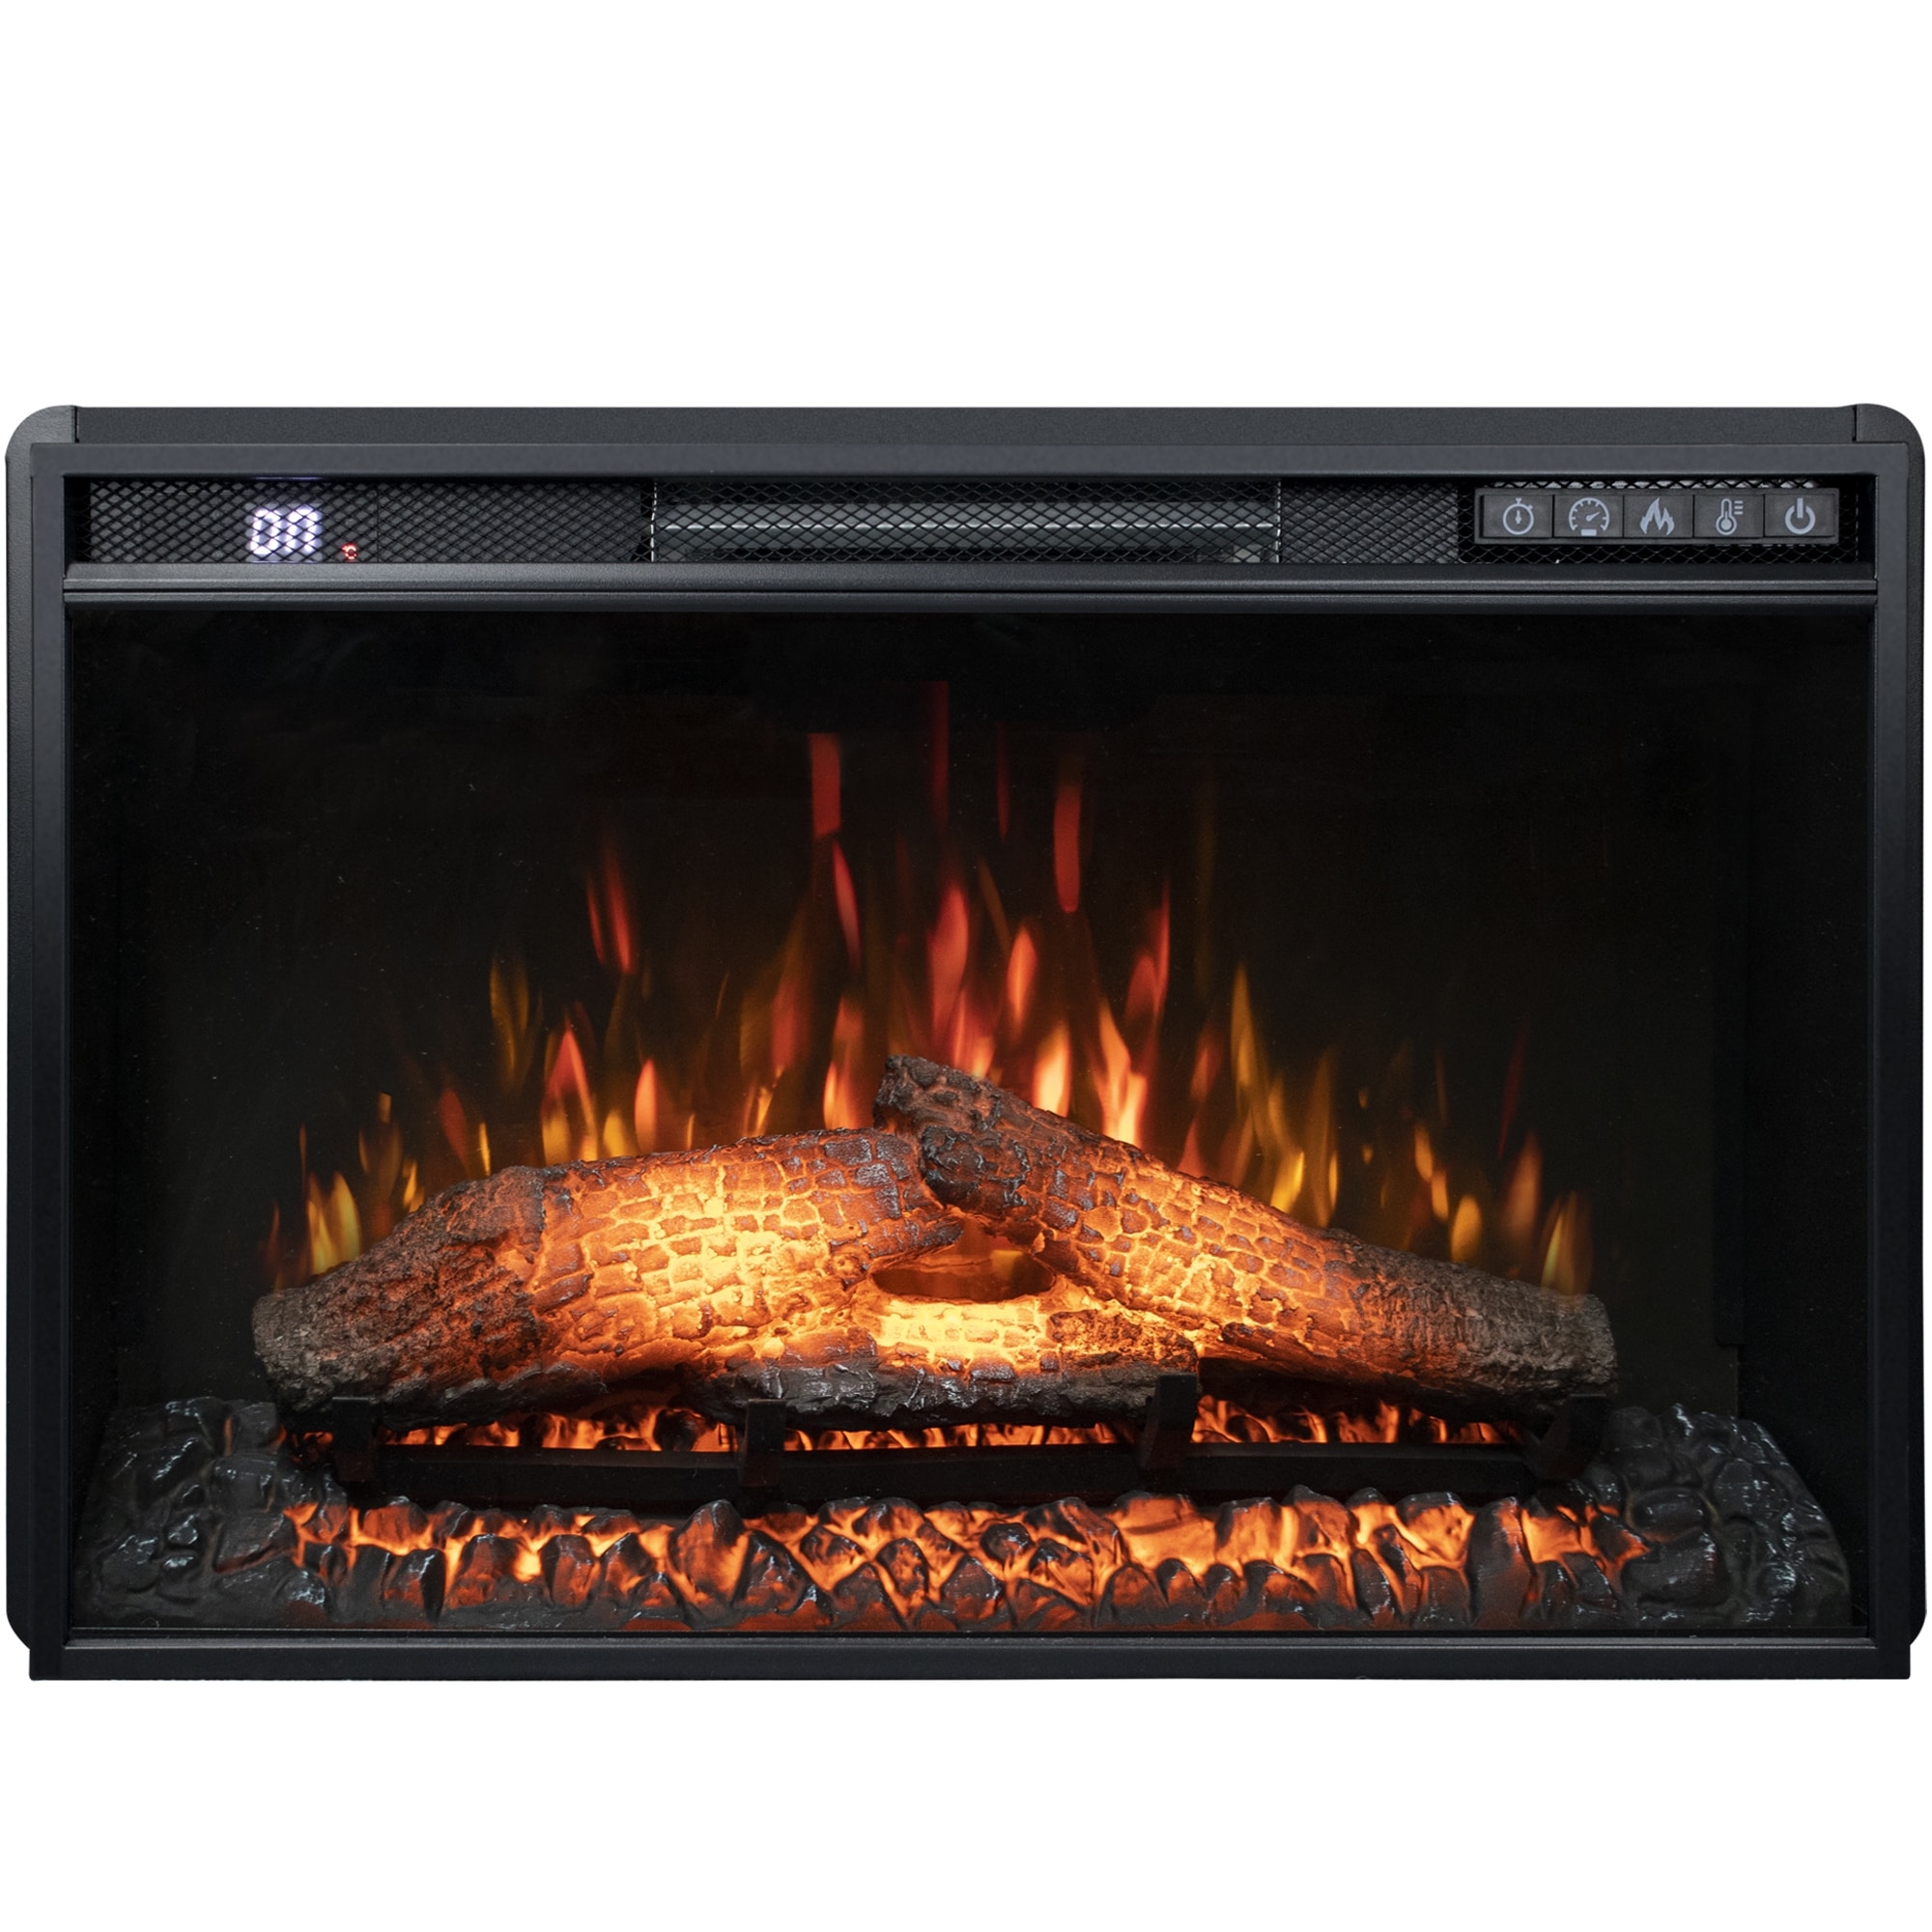 Prismaster 26in Recessed Electric Fireplace Insert with logs,1500W